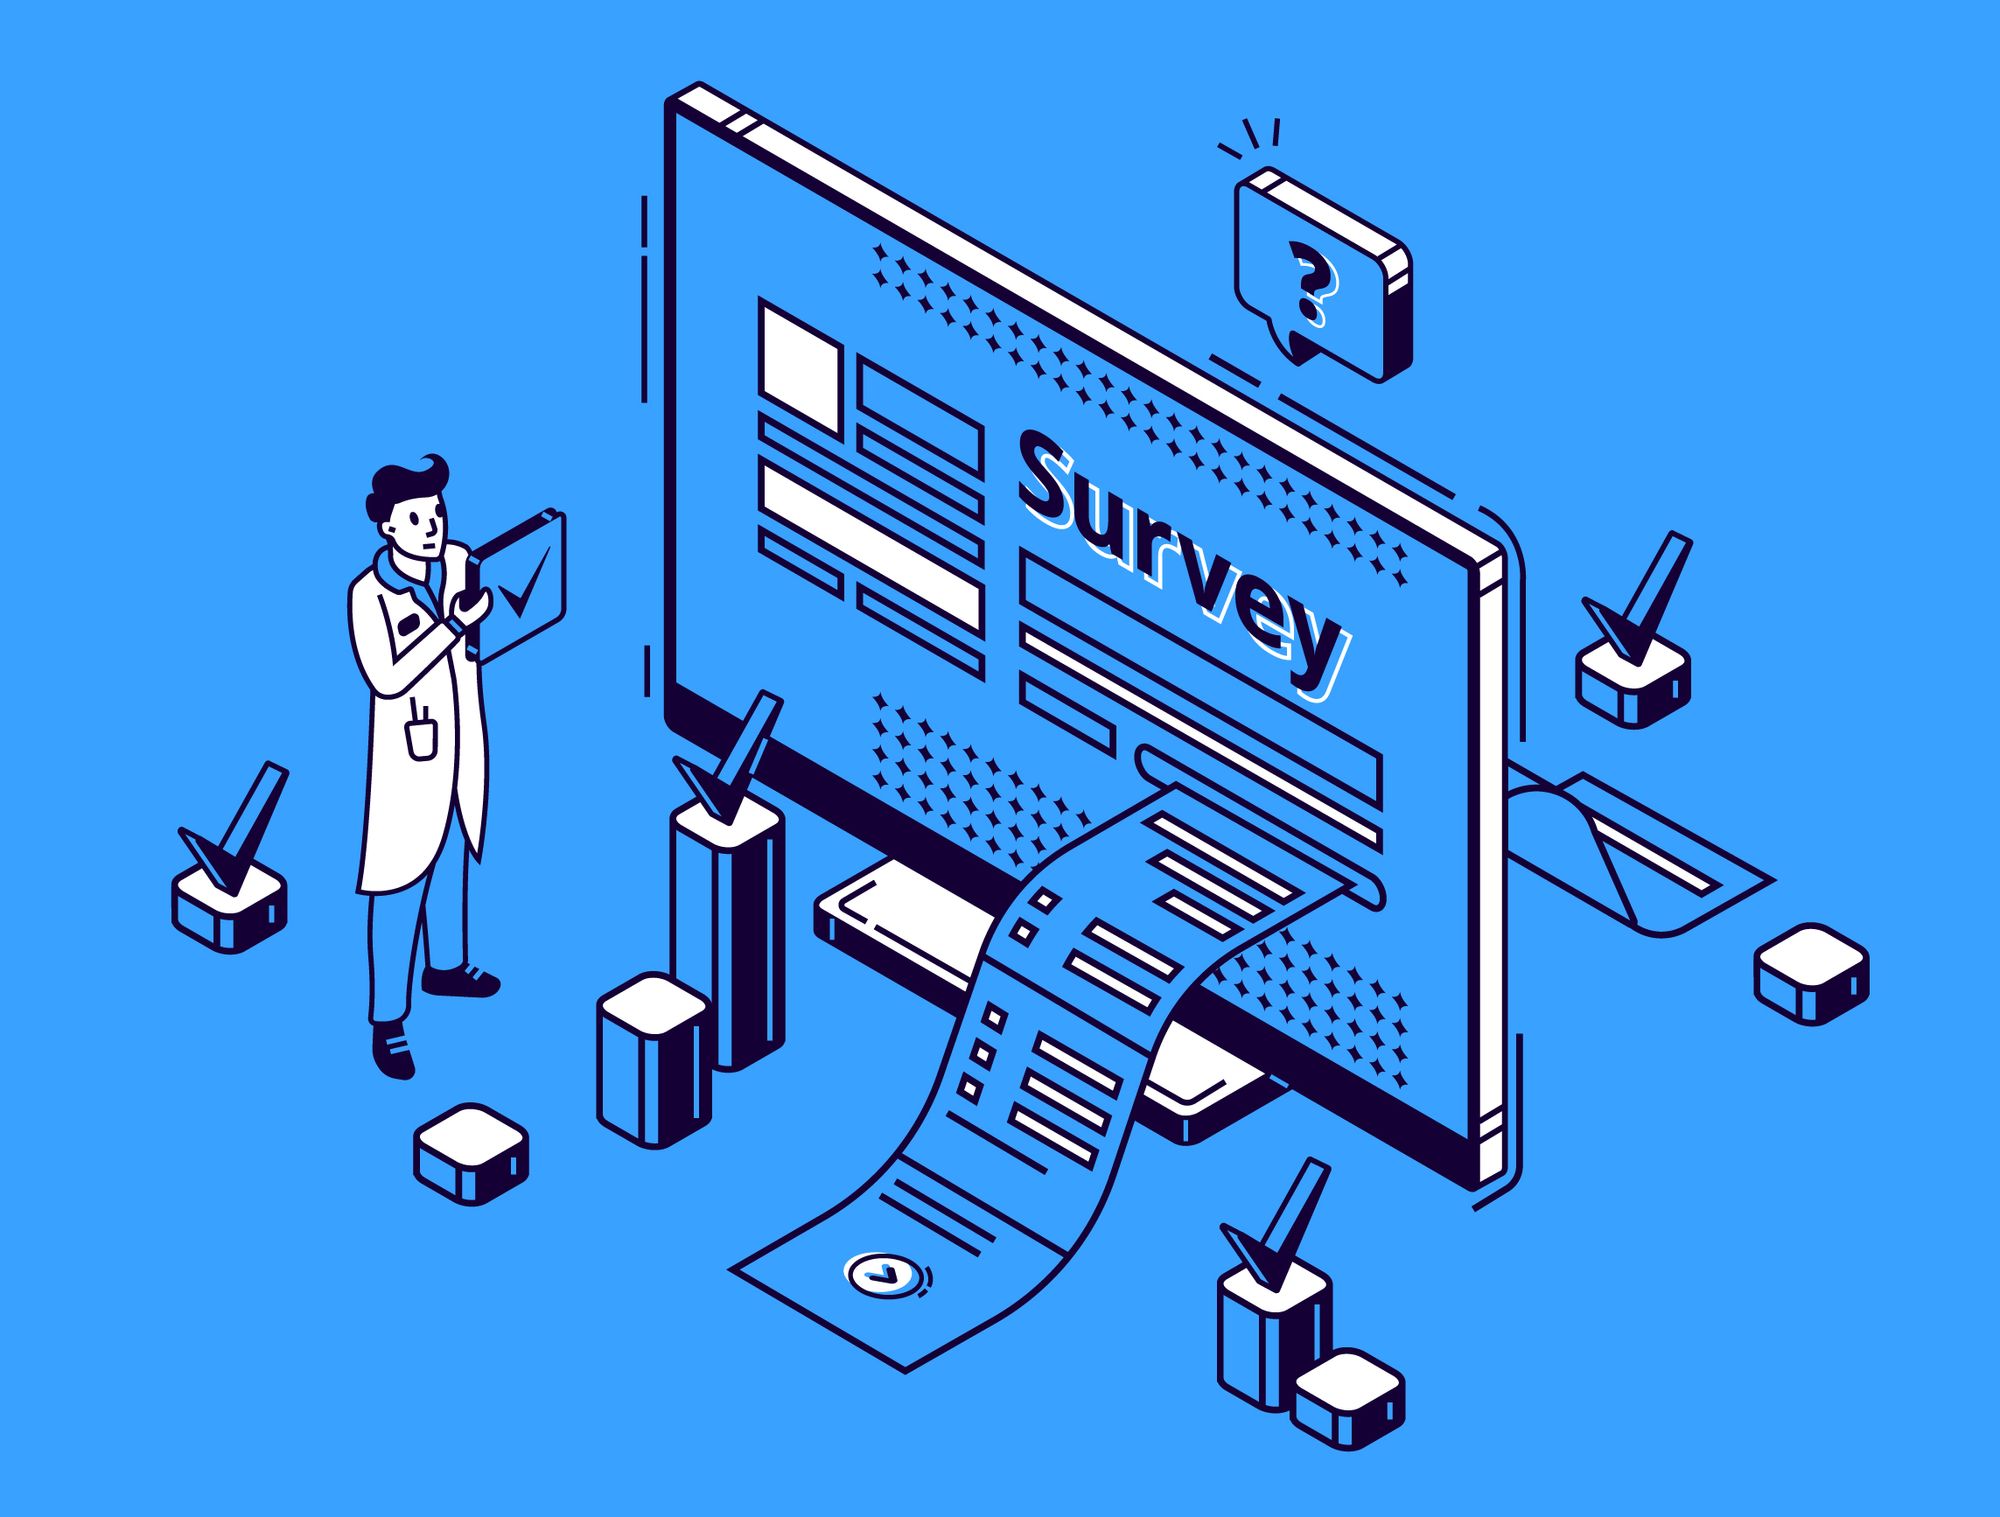 How to Improve Survey Response Based on Research